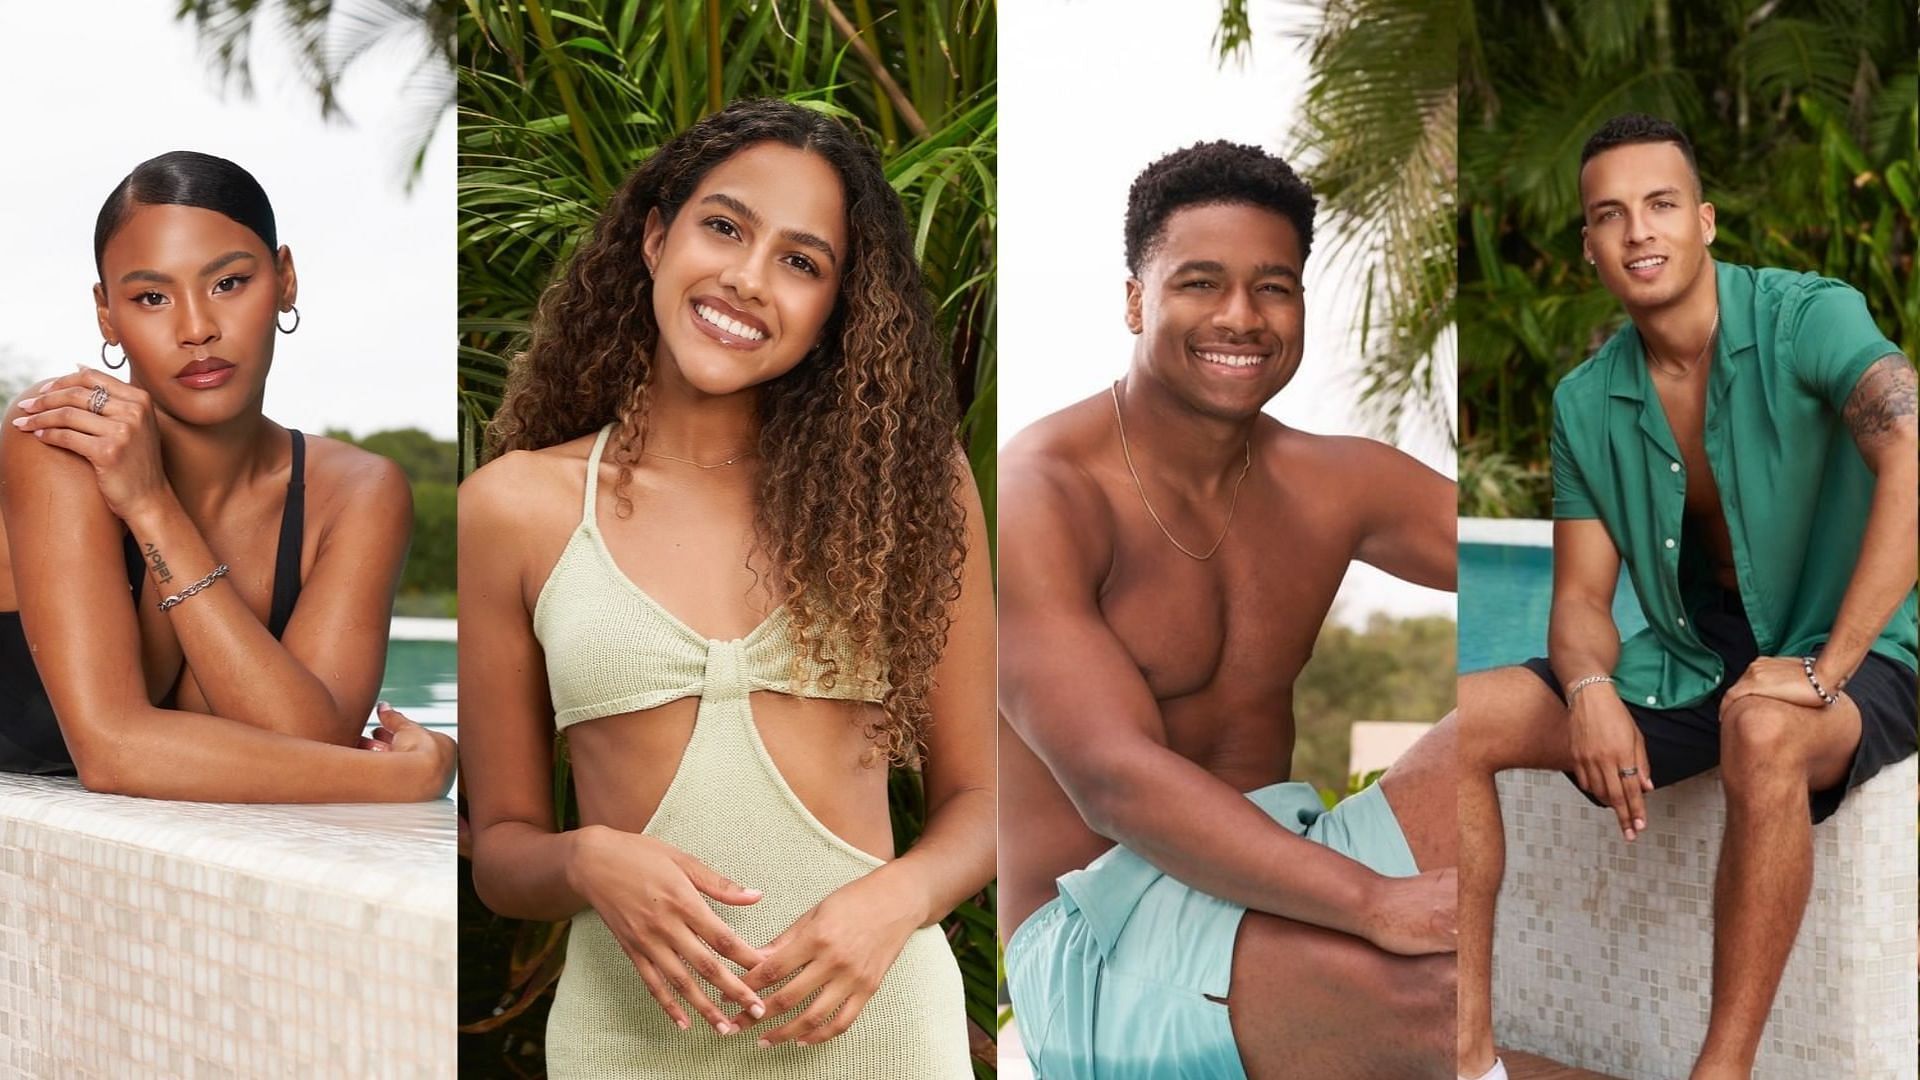 Bachelor in Paradise is set to return on Tuesday, September 27 